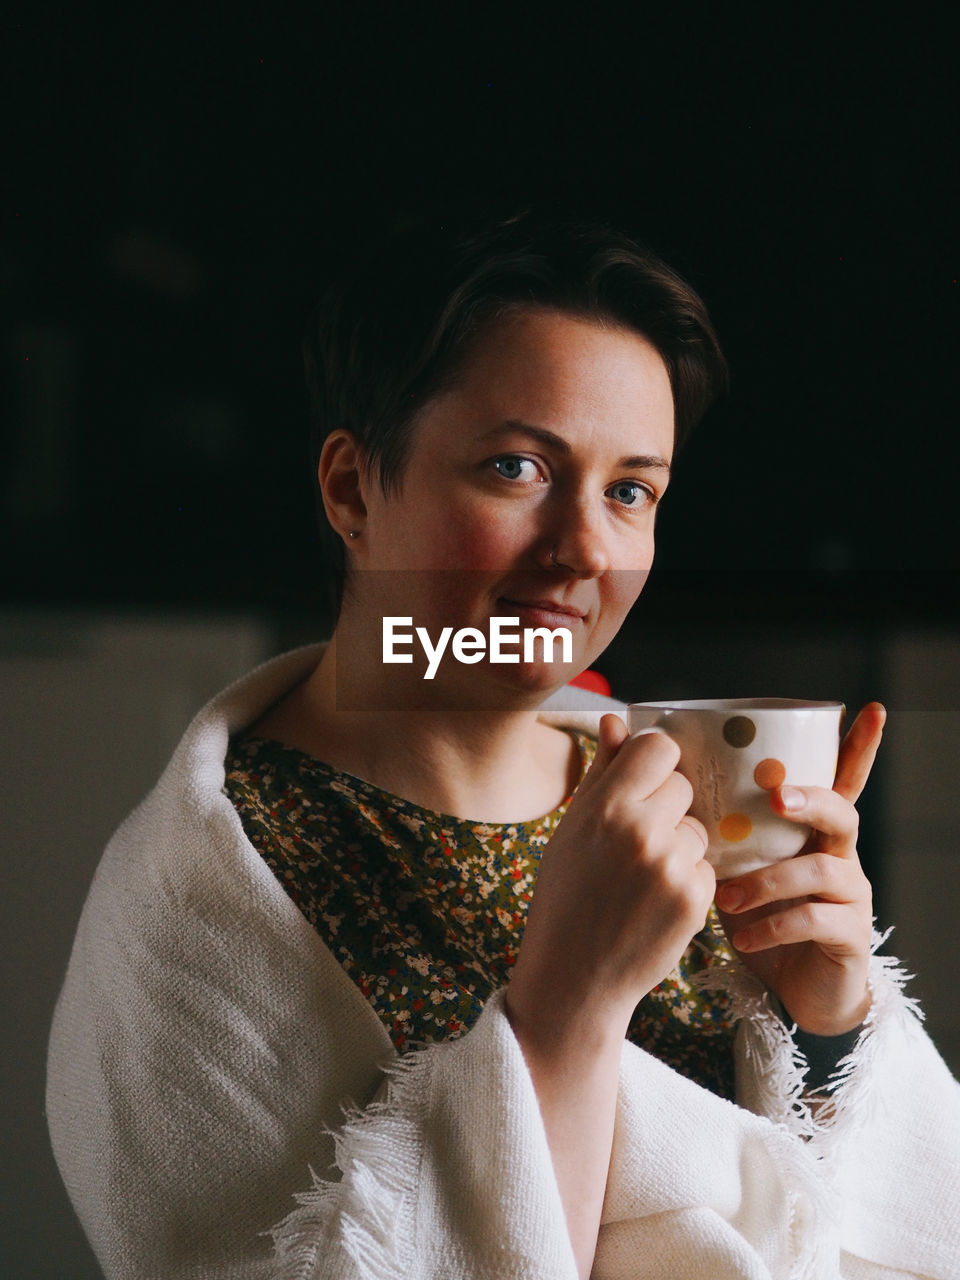 Portrait of a young woman with short hair at home with a cup of coffee or tea in the evening.